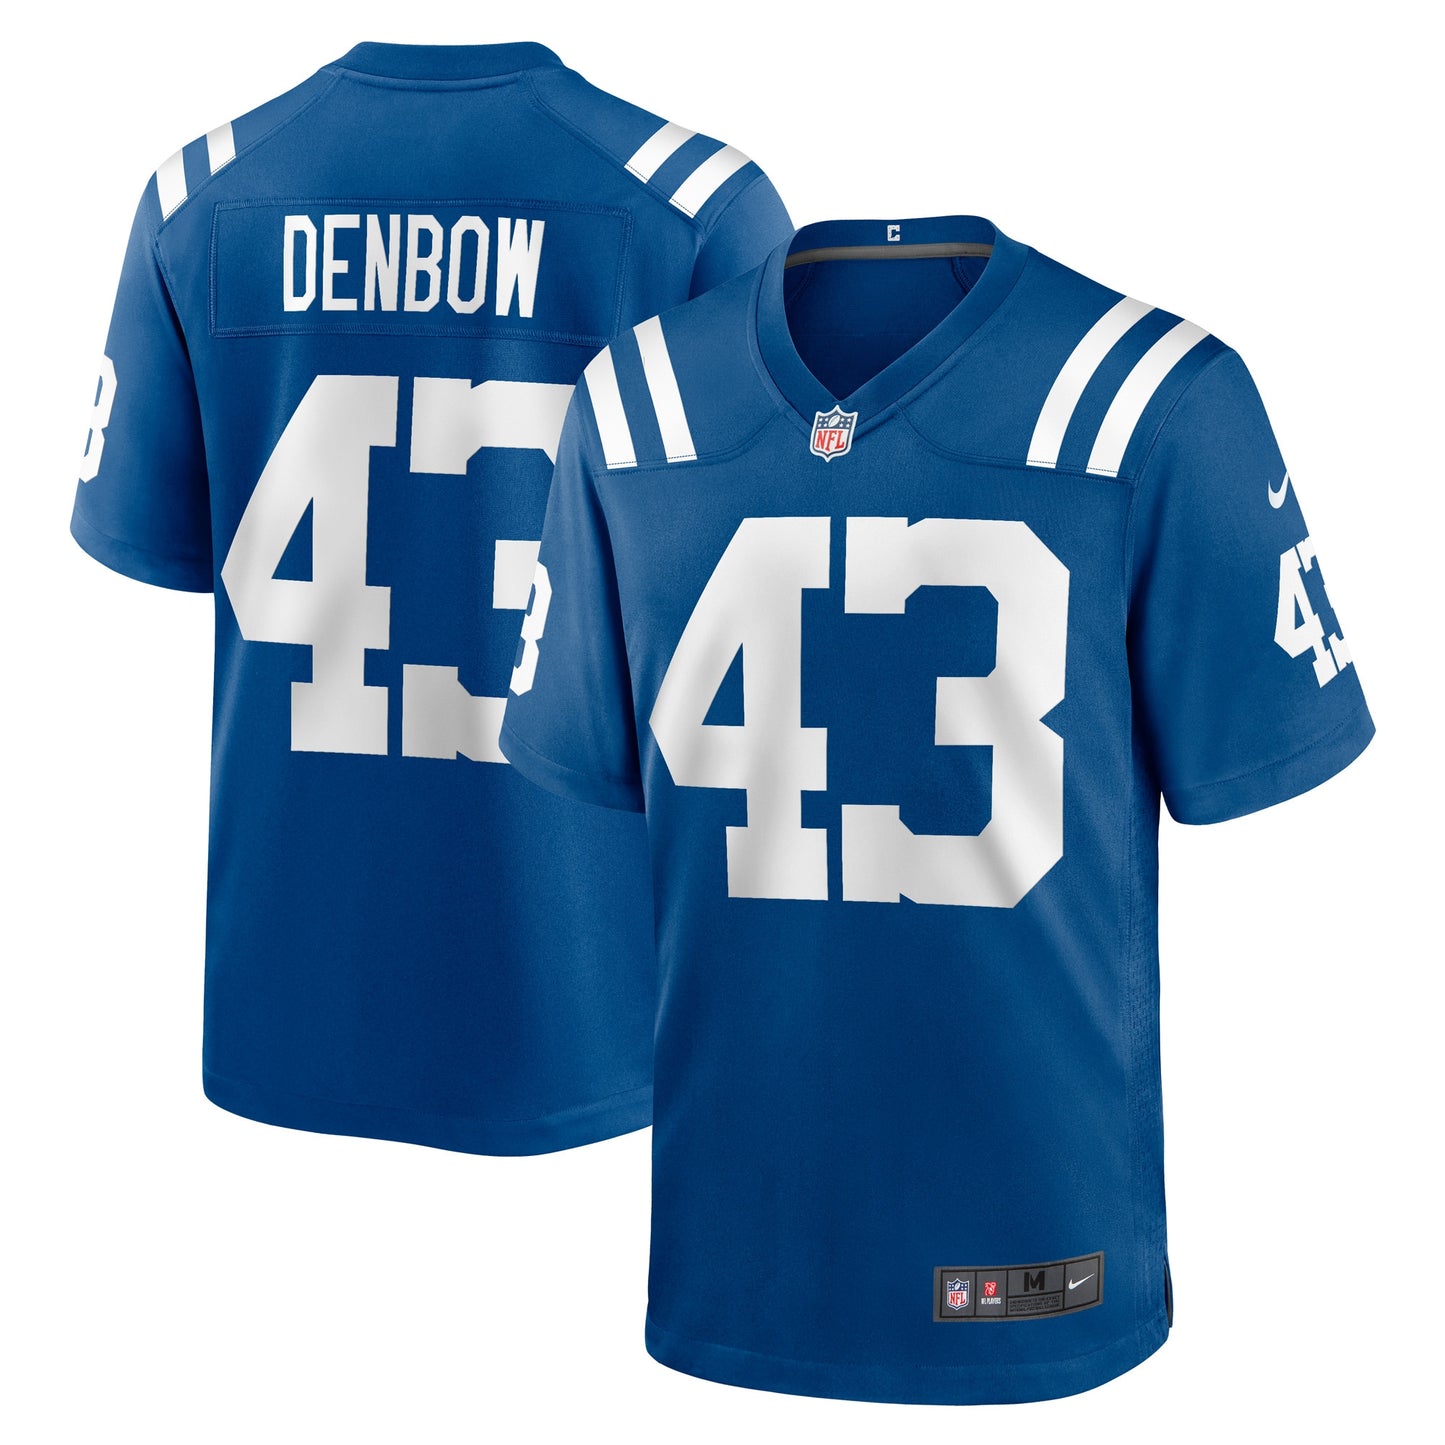 Trevor Denbow Indianapolis Colts Nike Game Player Jersey - Royal